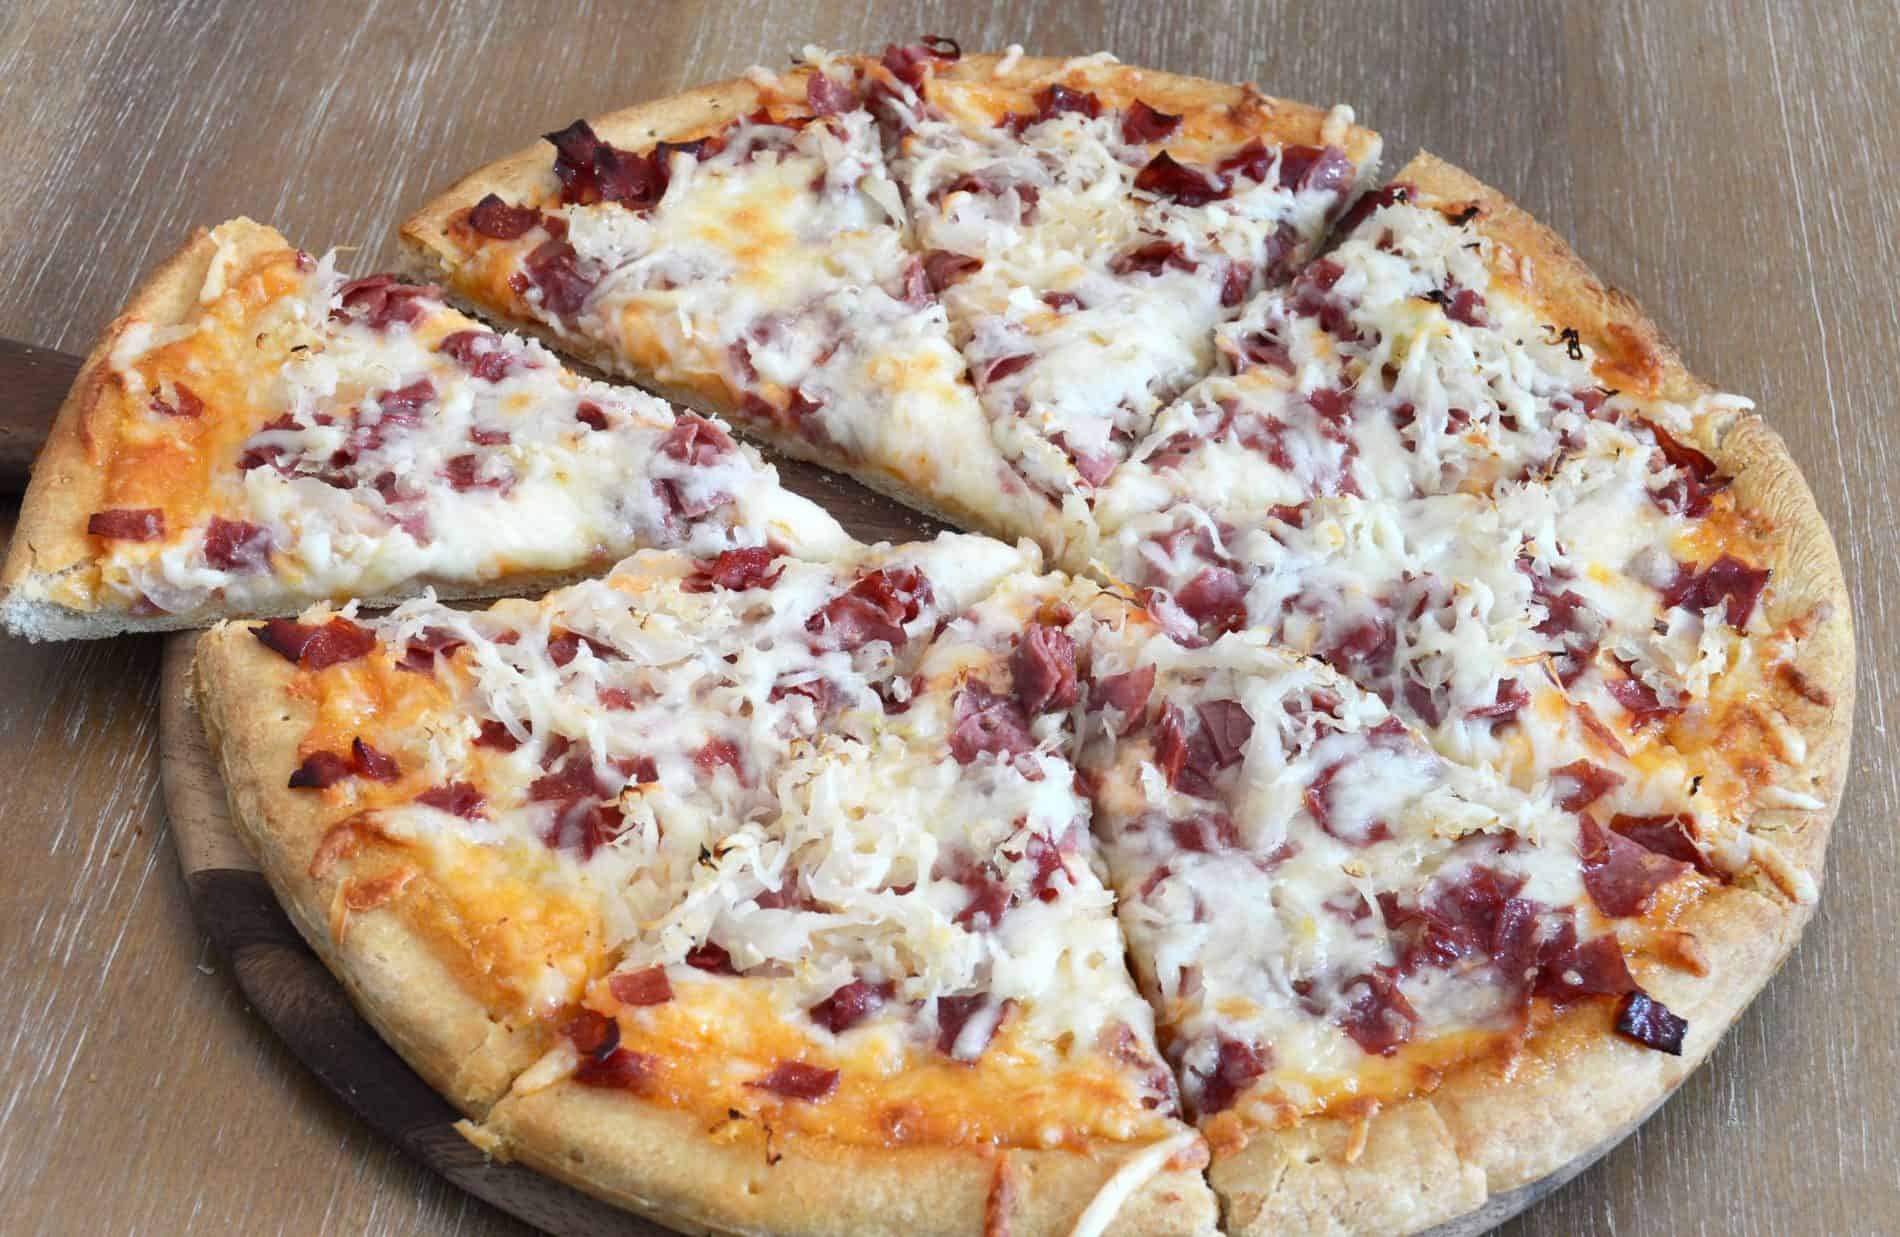 Reuben pizza recipe made with Jimmy's Thousand Island Dressing, corned beef, sauerkraut, and Swiss cheese.